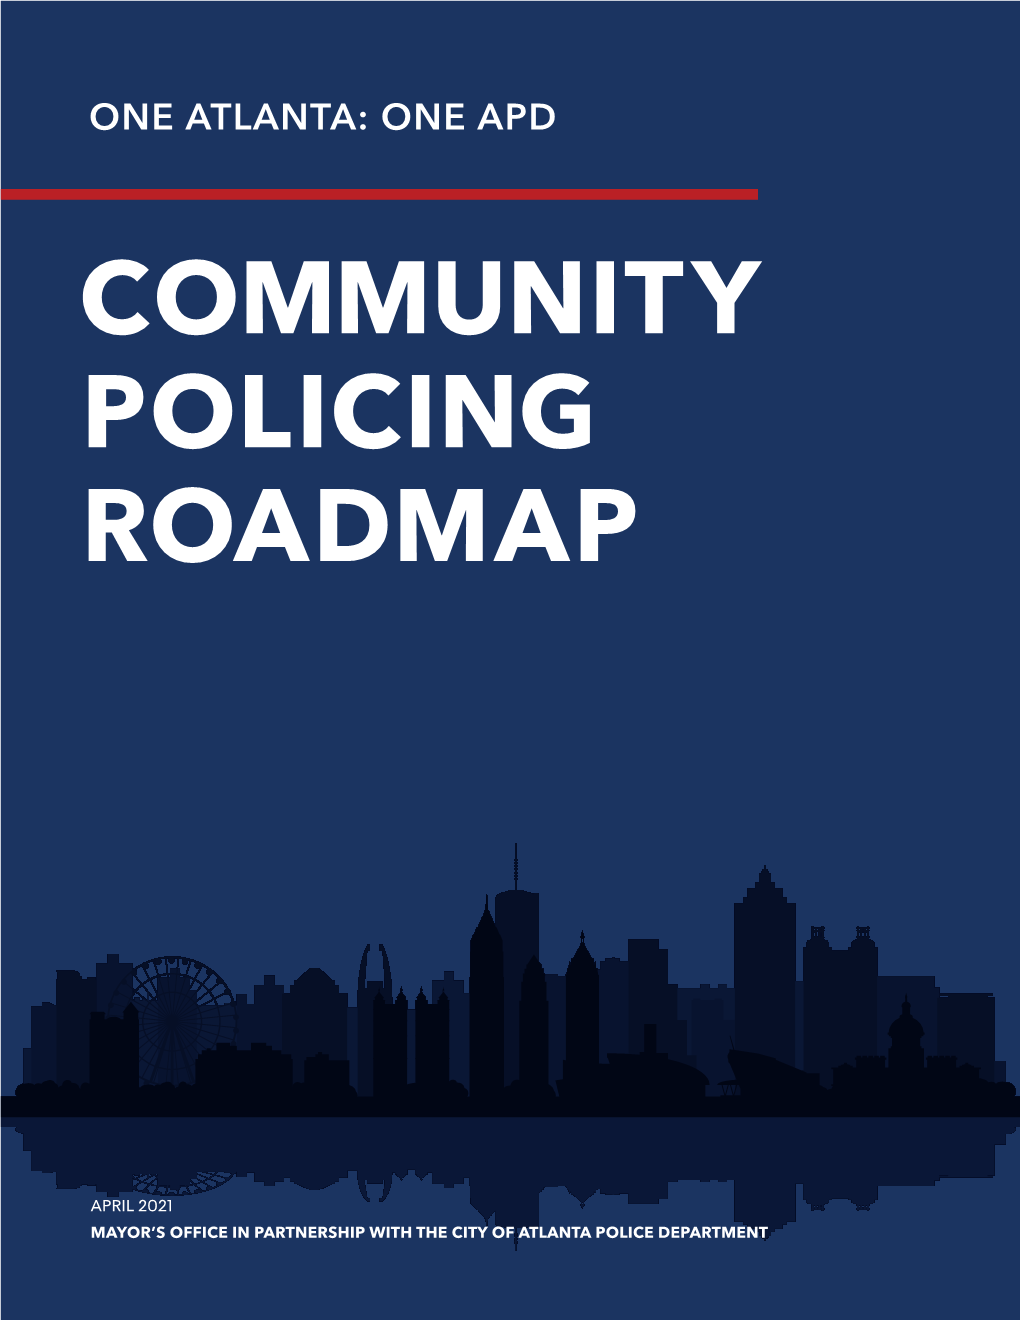 One APD Community Policing Roadmap